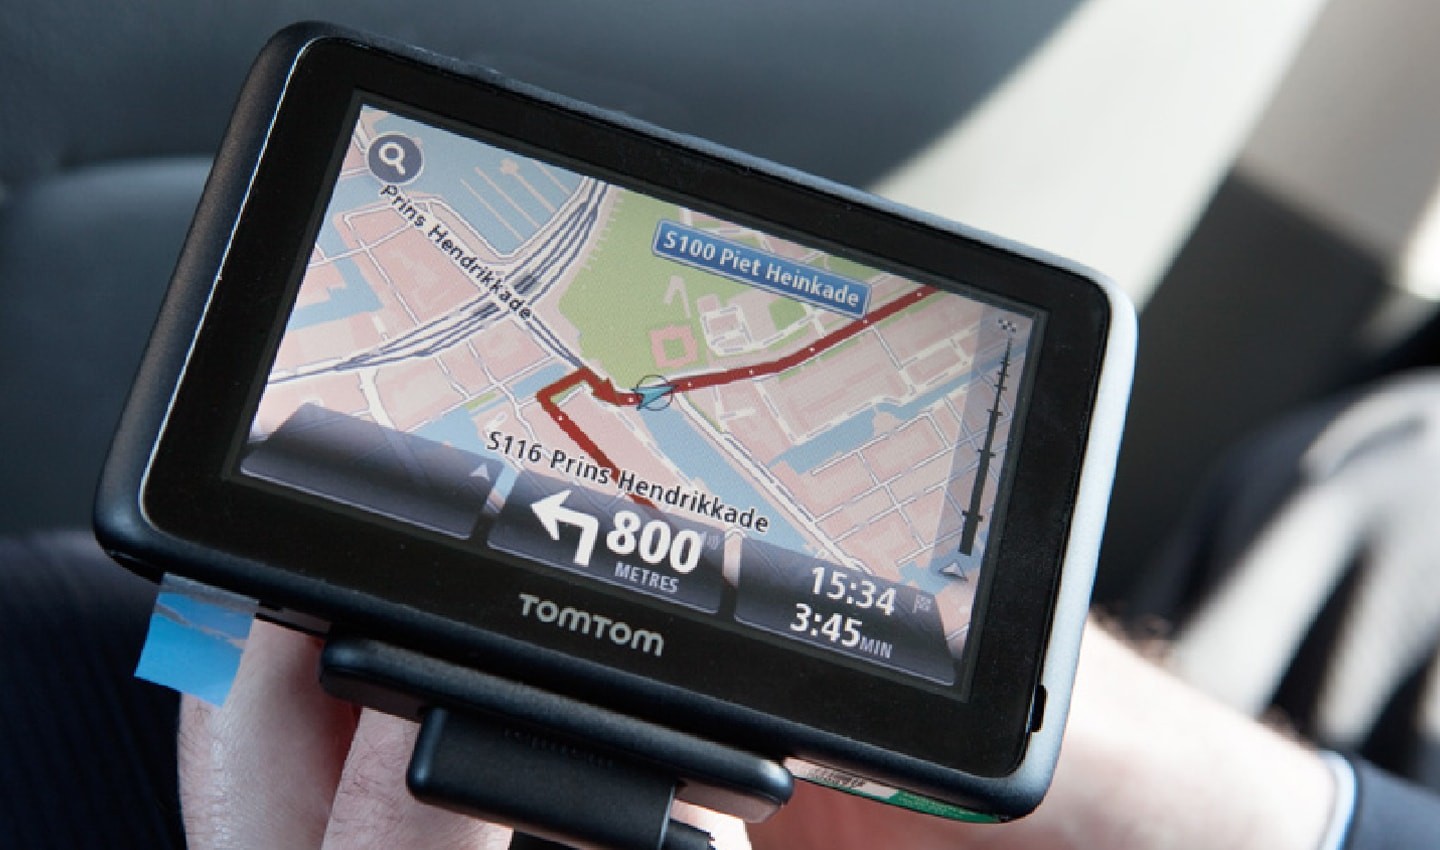 The TomTom GO was a neat, accessibly, and affordable device